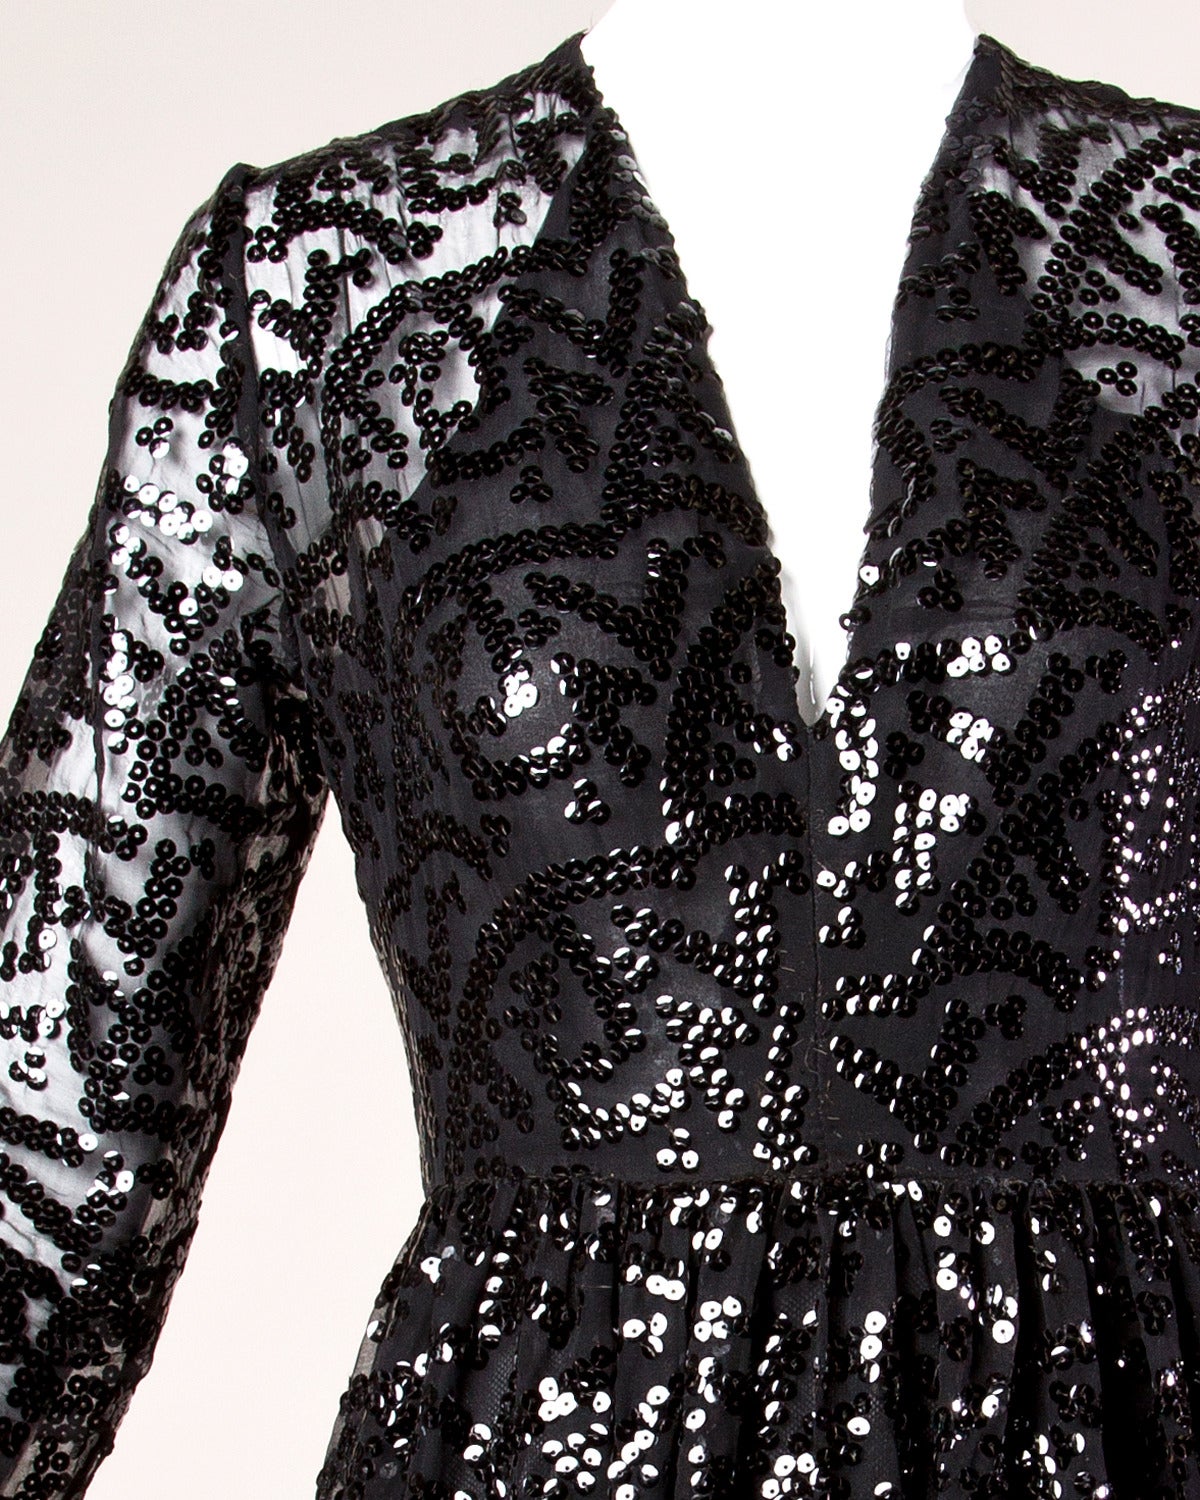 Vintage black sequin maxi dress by Evelyn Byrnes. Sheer sleeves with zip up cuffs.

Details:

Partially Lined
Hand Sewn Black Sequins
Sheer Sleeves
Rear Zip Closure
Marked Size: Not Marked
Estimated Size: Medium
Color: Black
Label Evelyn